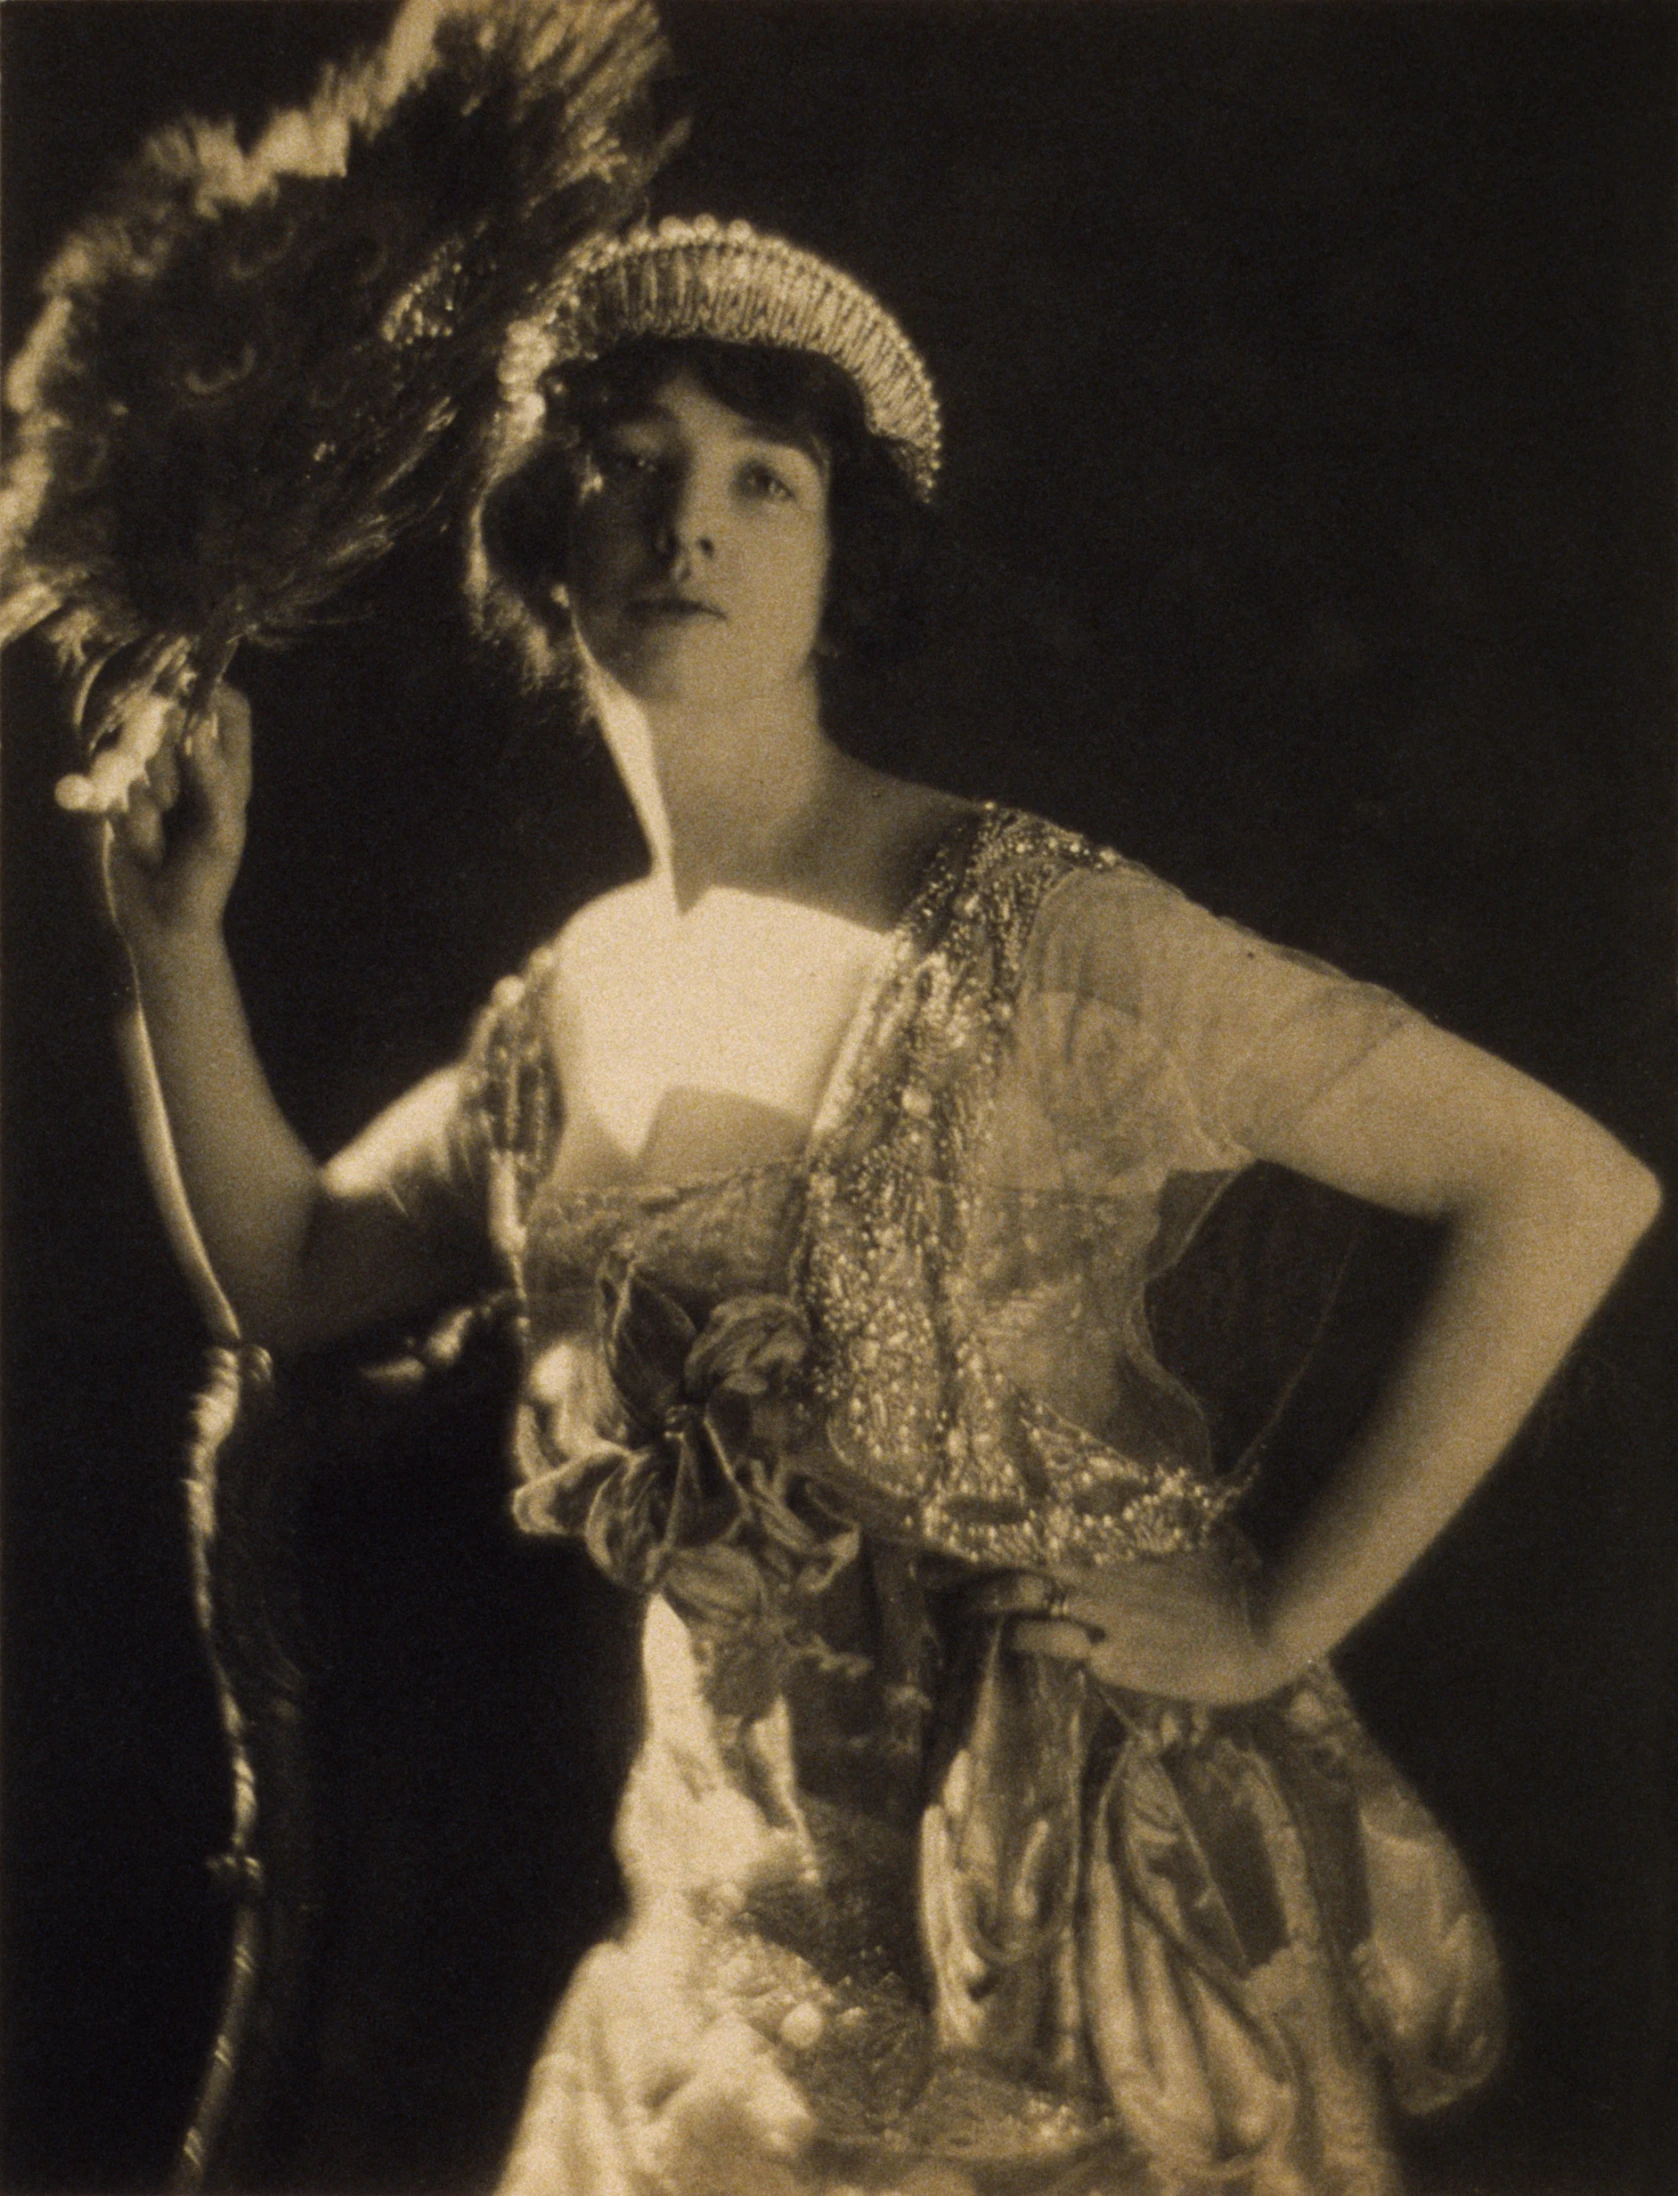 woman wearing costume holding a feather or fan with one hand